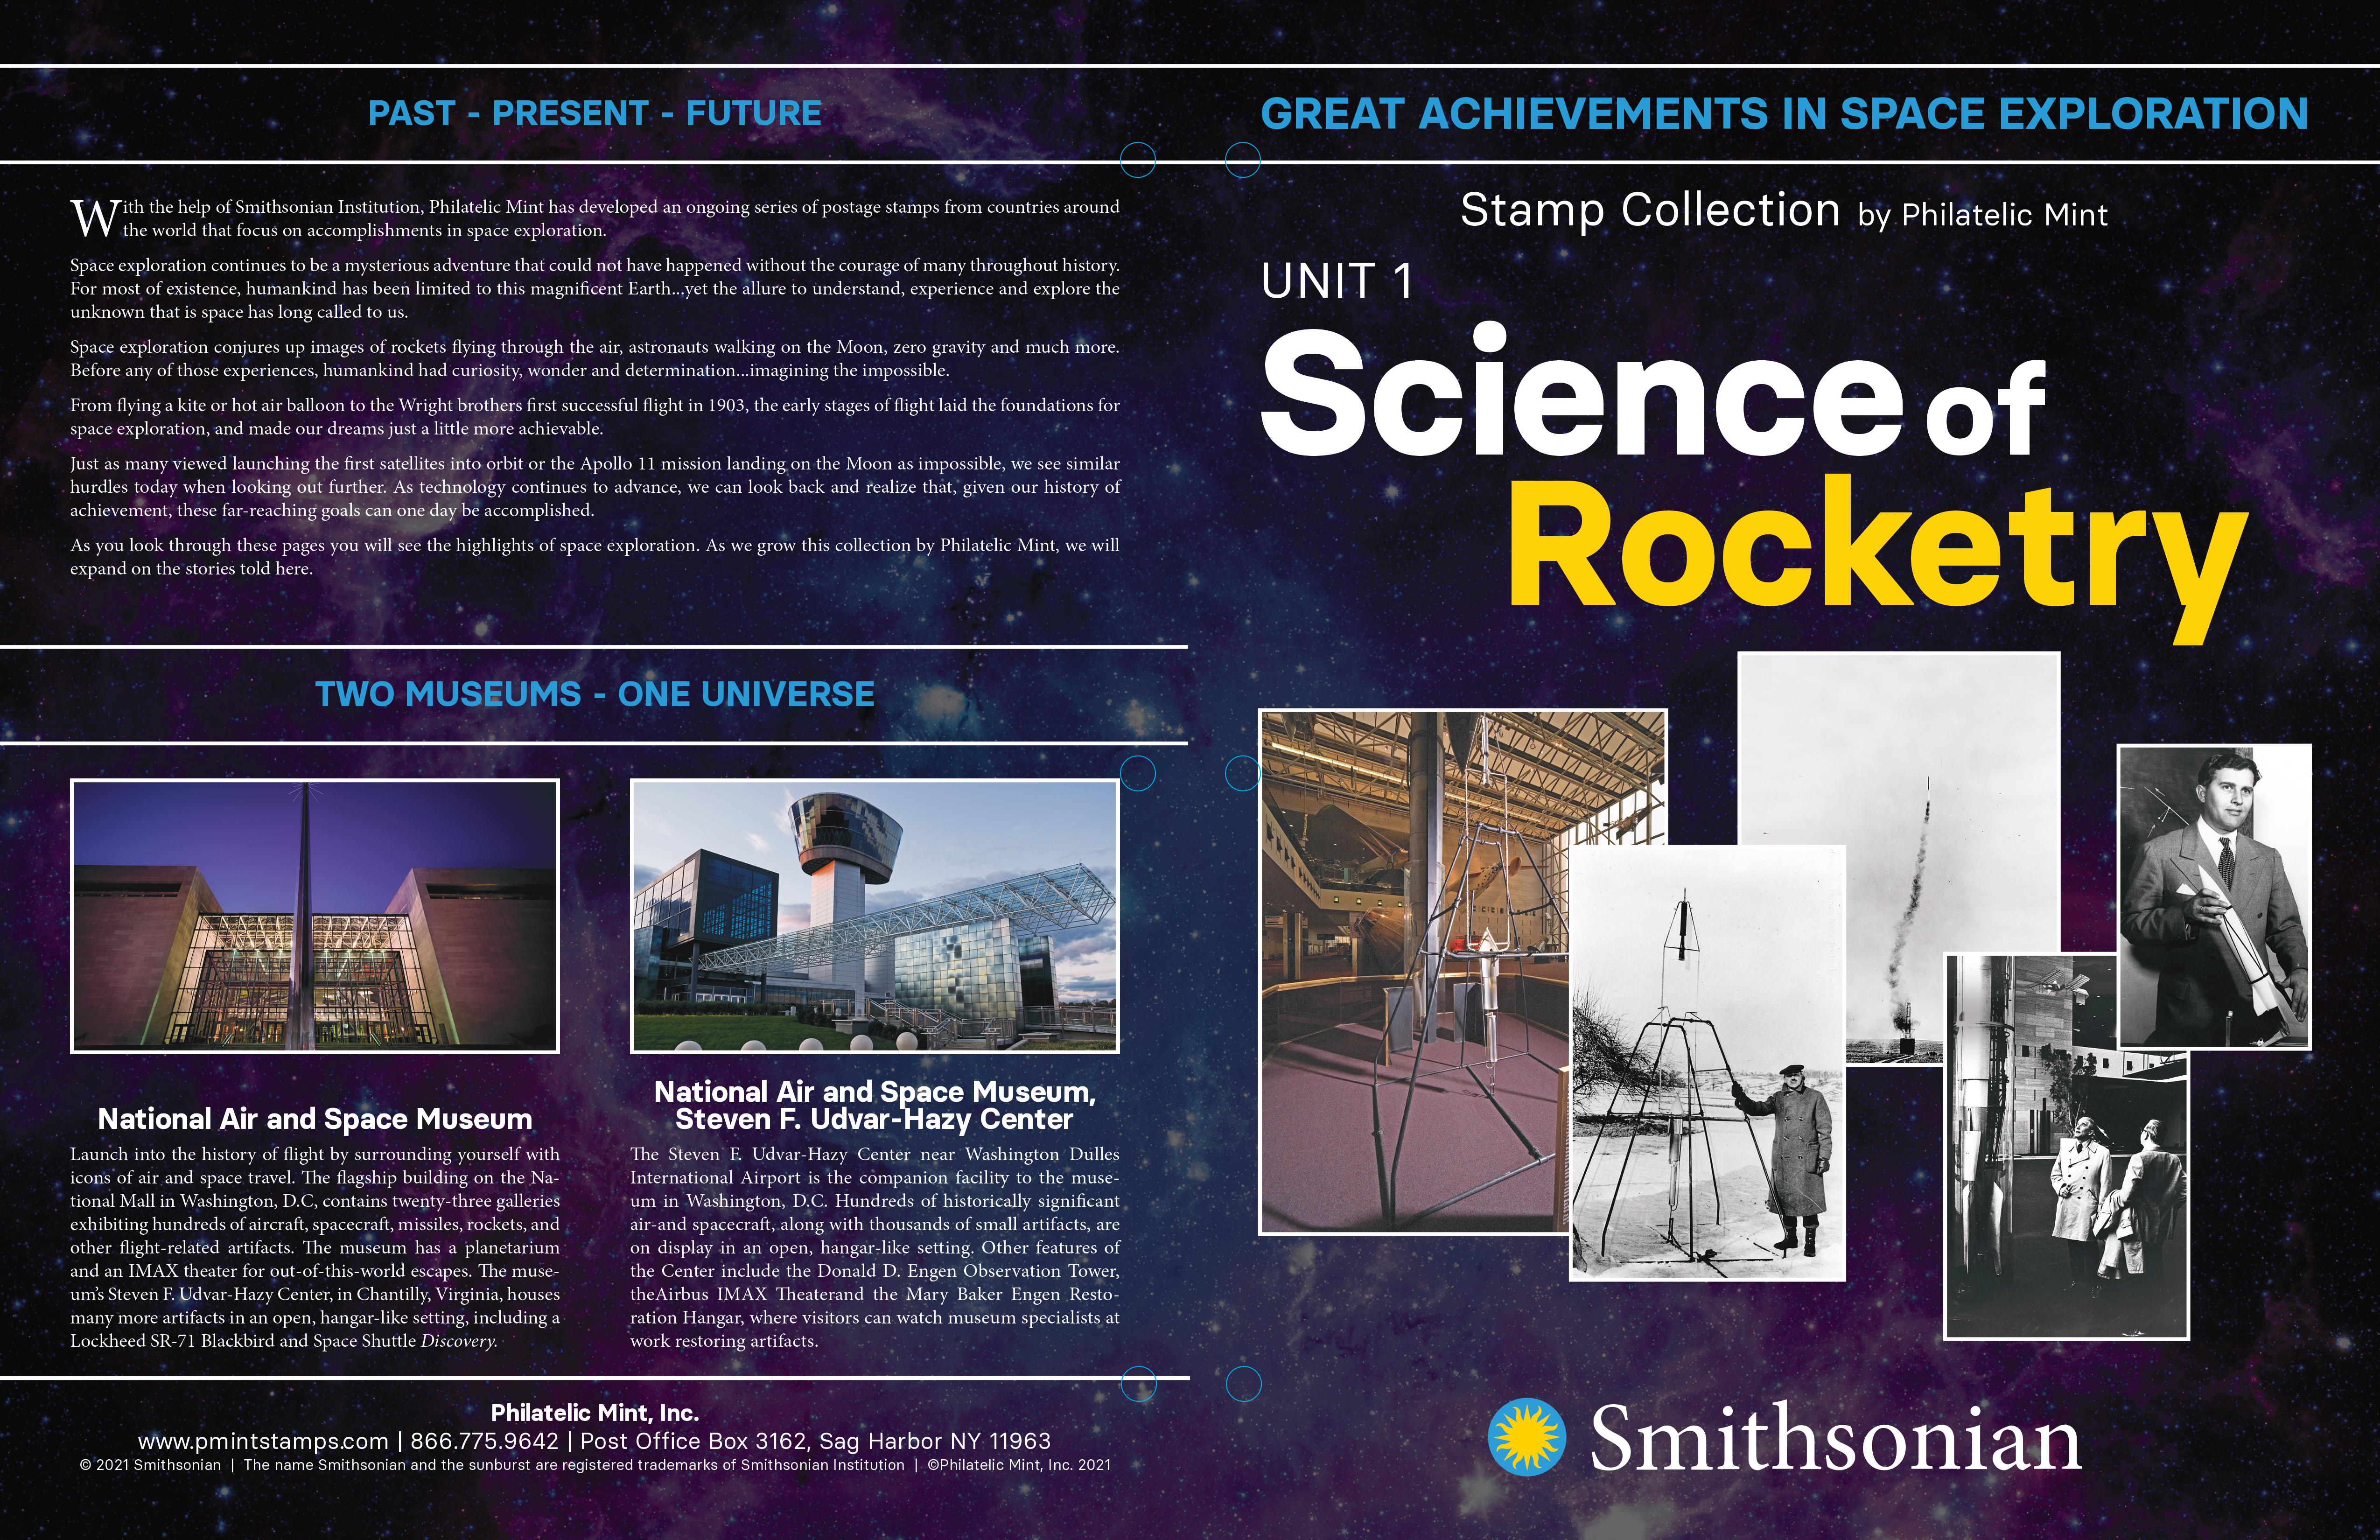 Unit 1 - Science of Rocketry